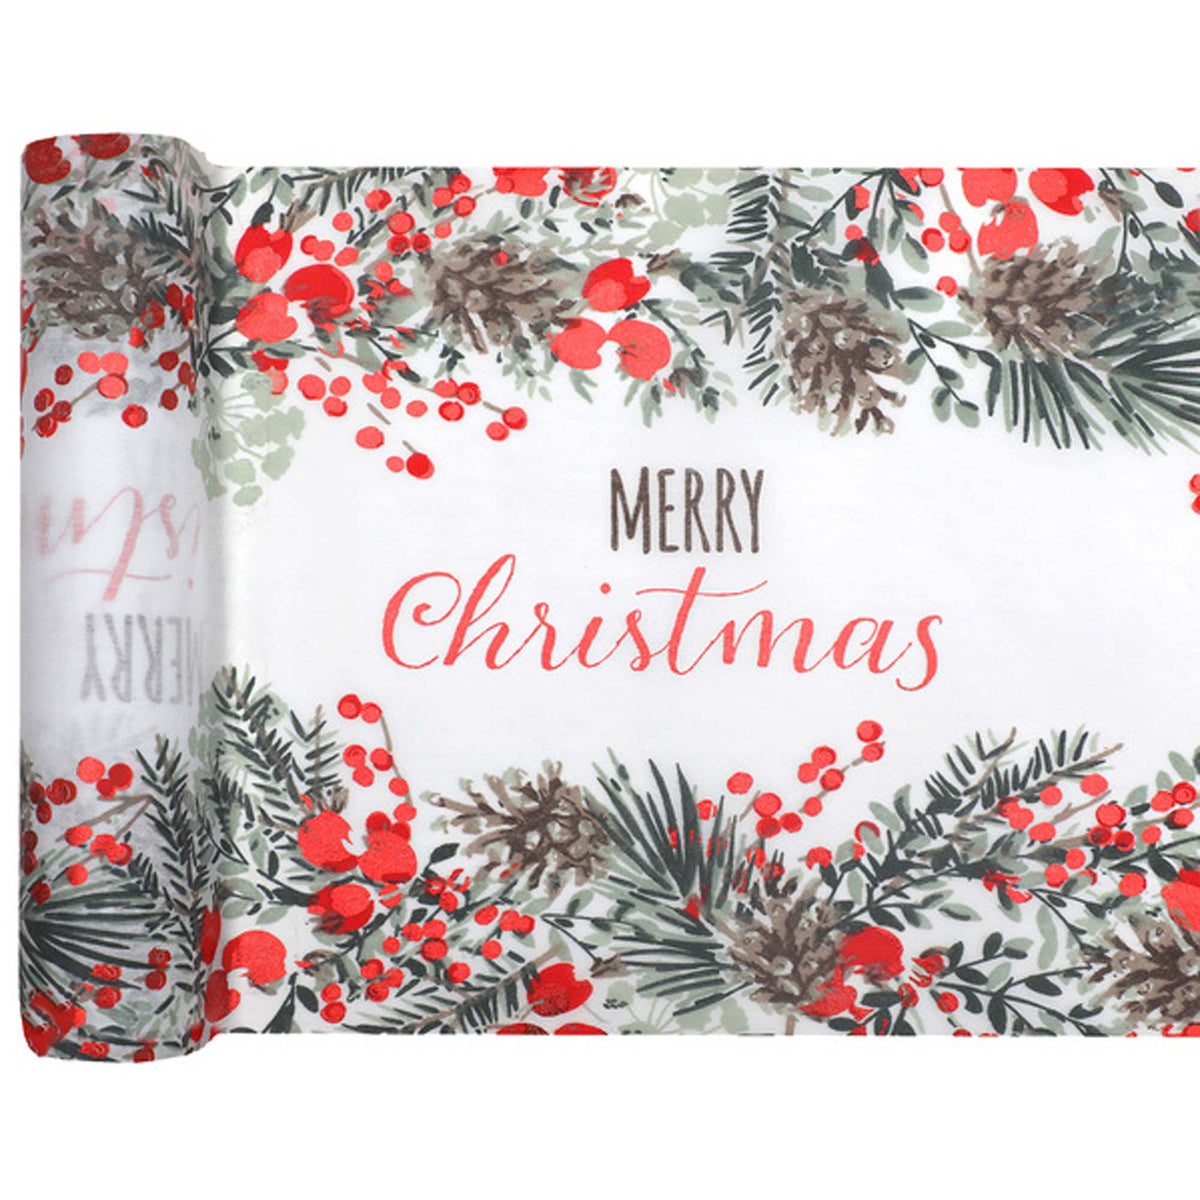 SANTEX Christmas Merry Christmas Red Table Runner, 12 x 118 Inches 3660380083955